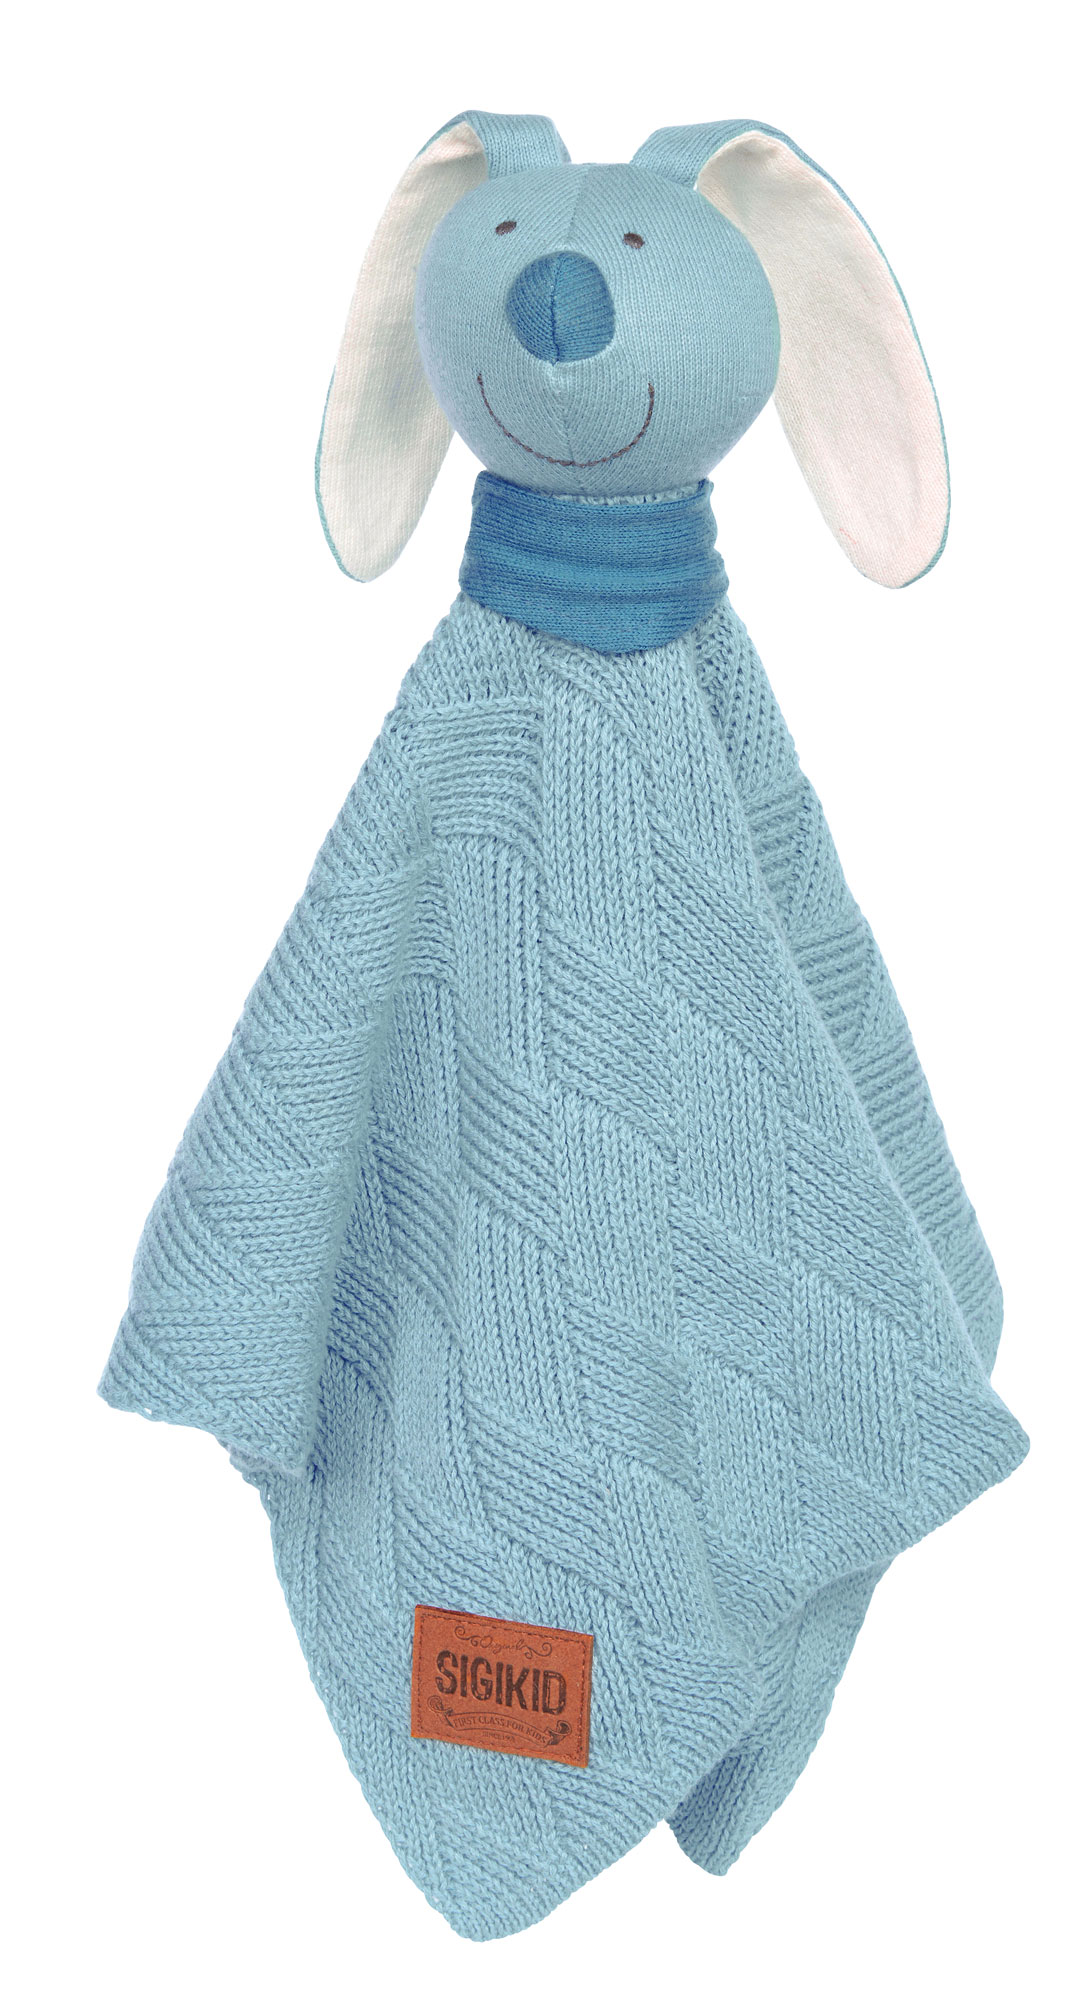 Baby blankie bunny, blue, Knitted Love